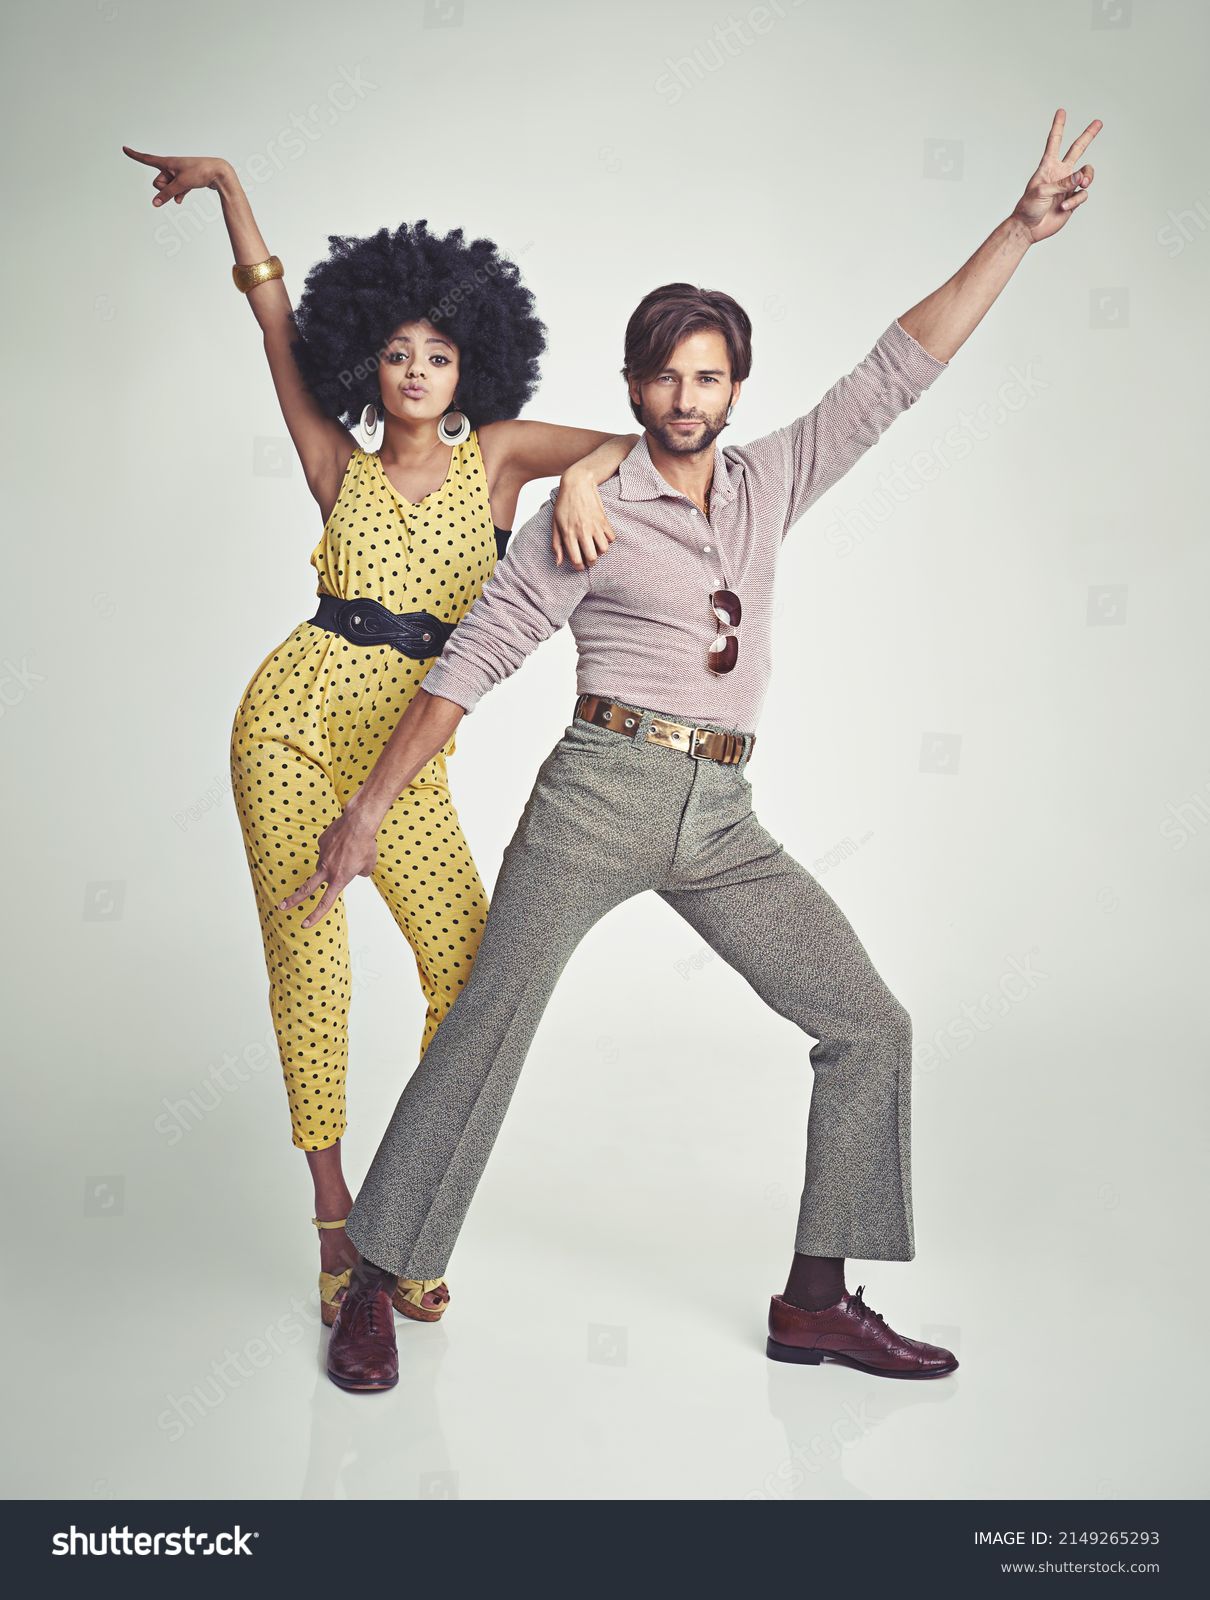 Lets dance. An attractive young couple standing together in retro 70s clothing. #2149265293